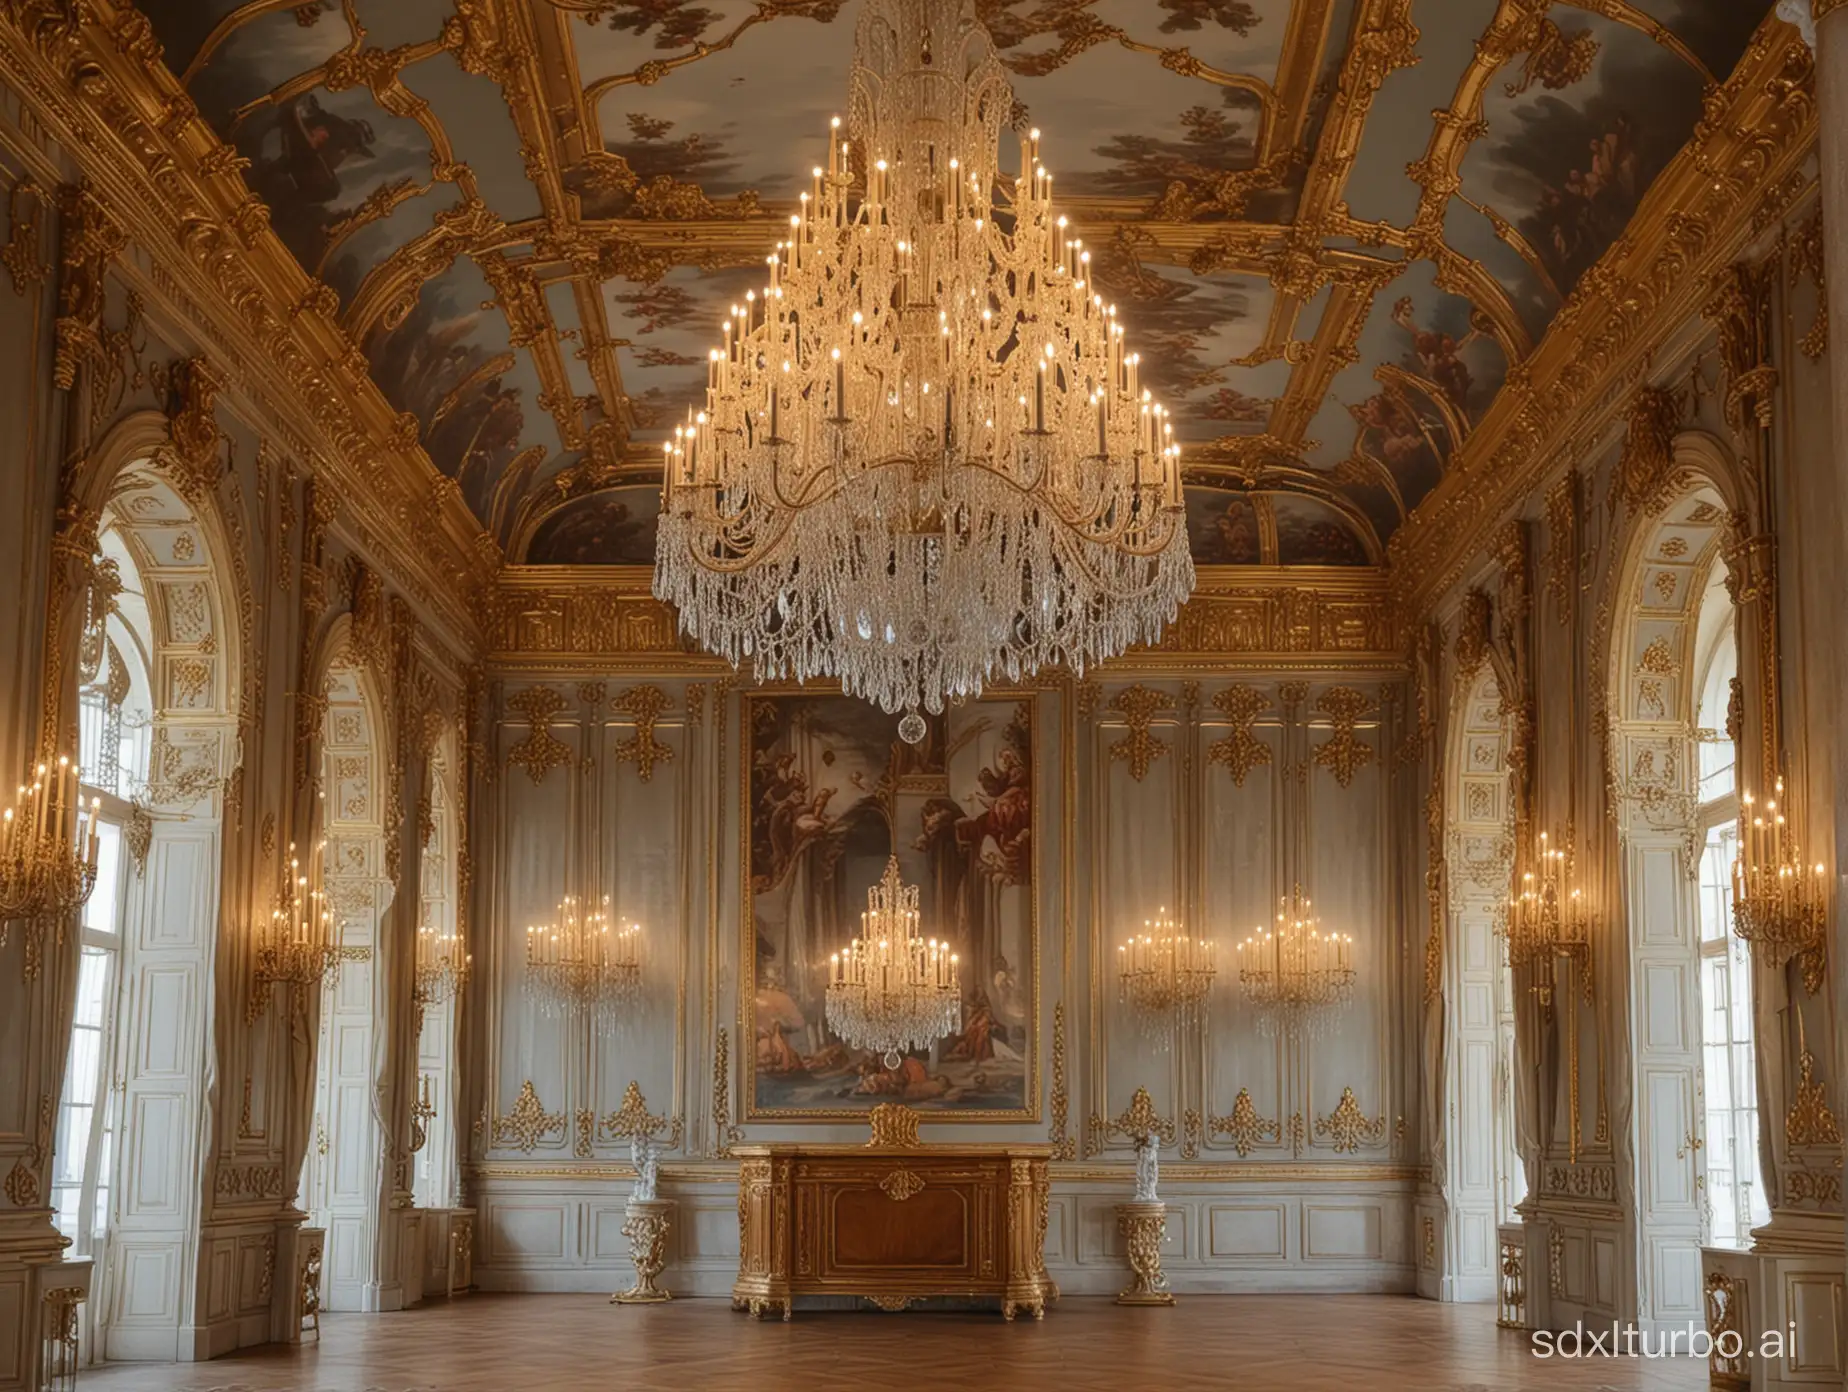 wall view closeup.face-to-face. set in an opulent royal castle interior adorned with chandeliers